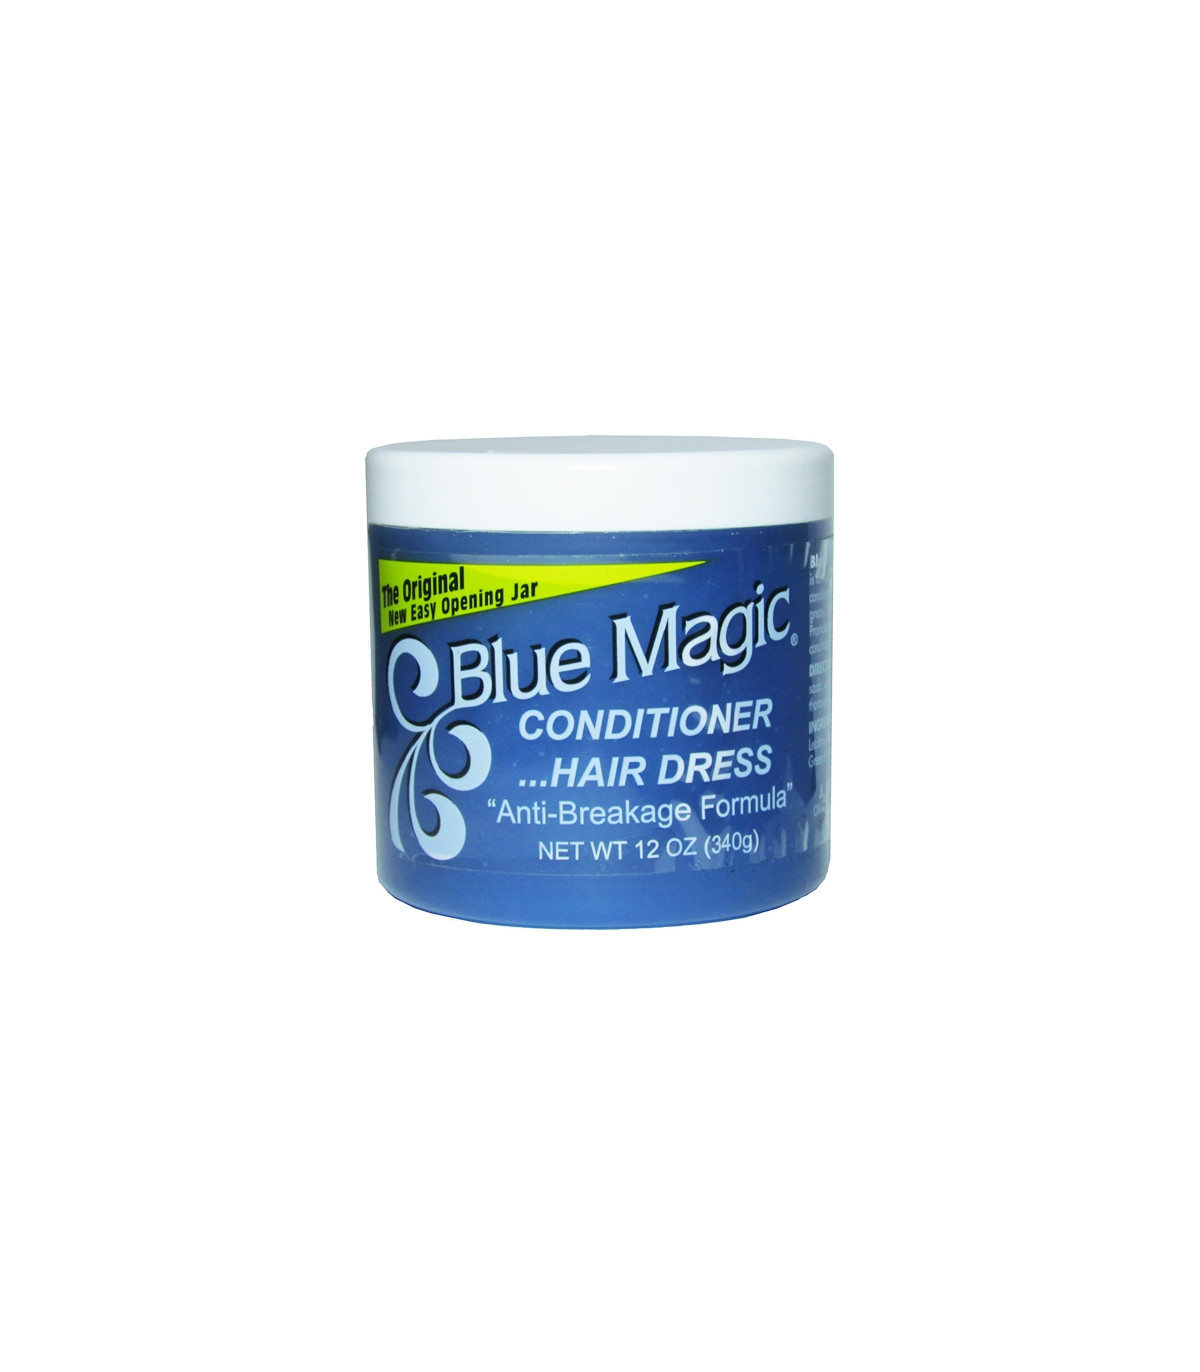 Blue Magic Conditioner and Hair Dress - 340g